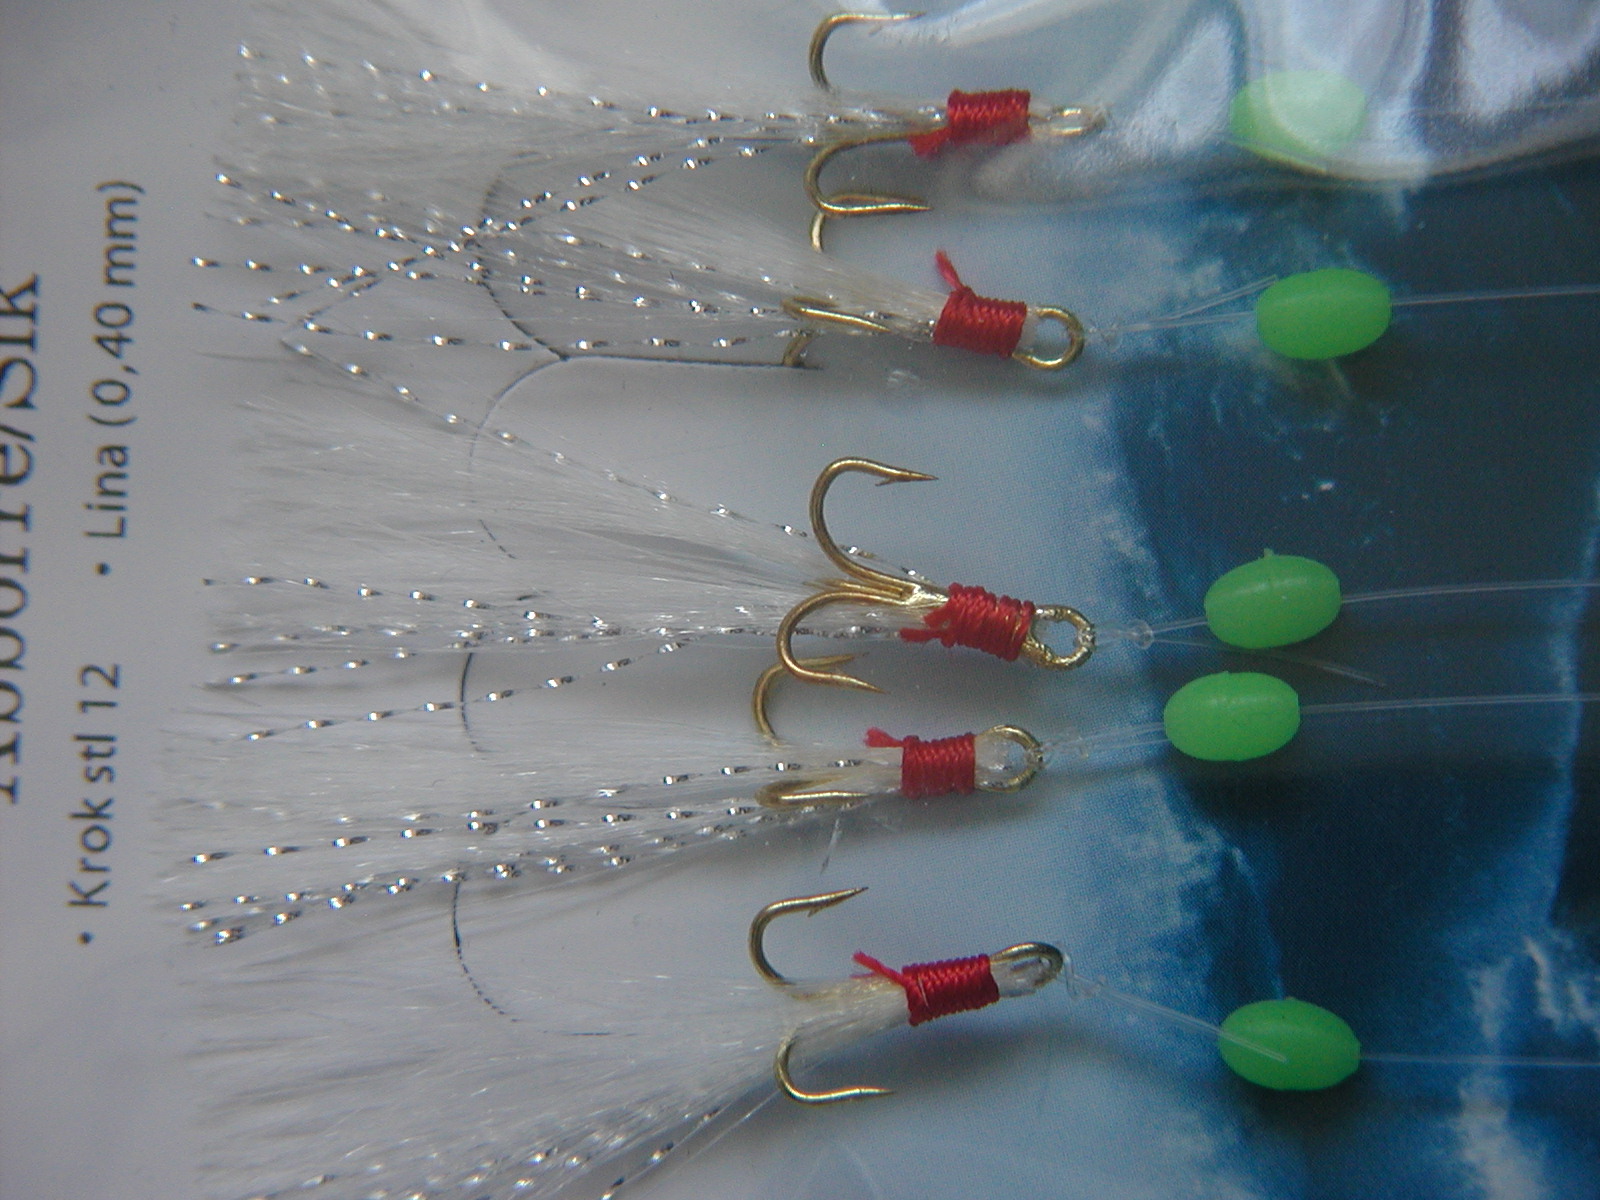 Details about   Wild.life 150pcs/ Lot 3 Sizes Fishing Treble Hooks Protector Safety Holder Co... 